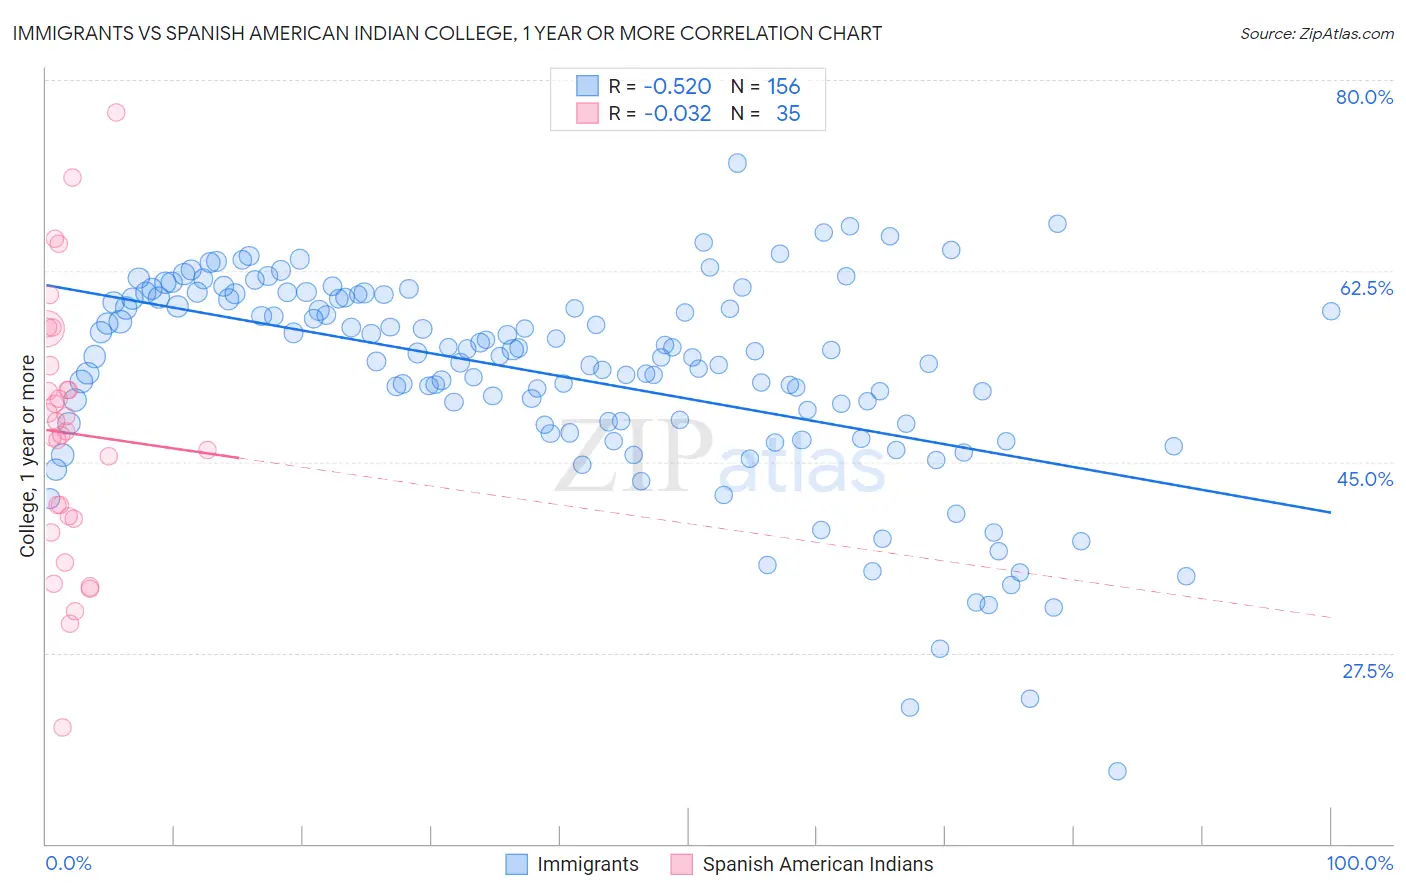 Immigrants vs Spanish American Indian College, 1 year or more